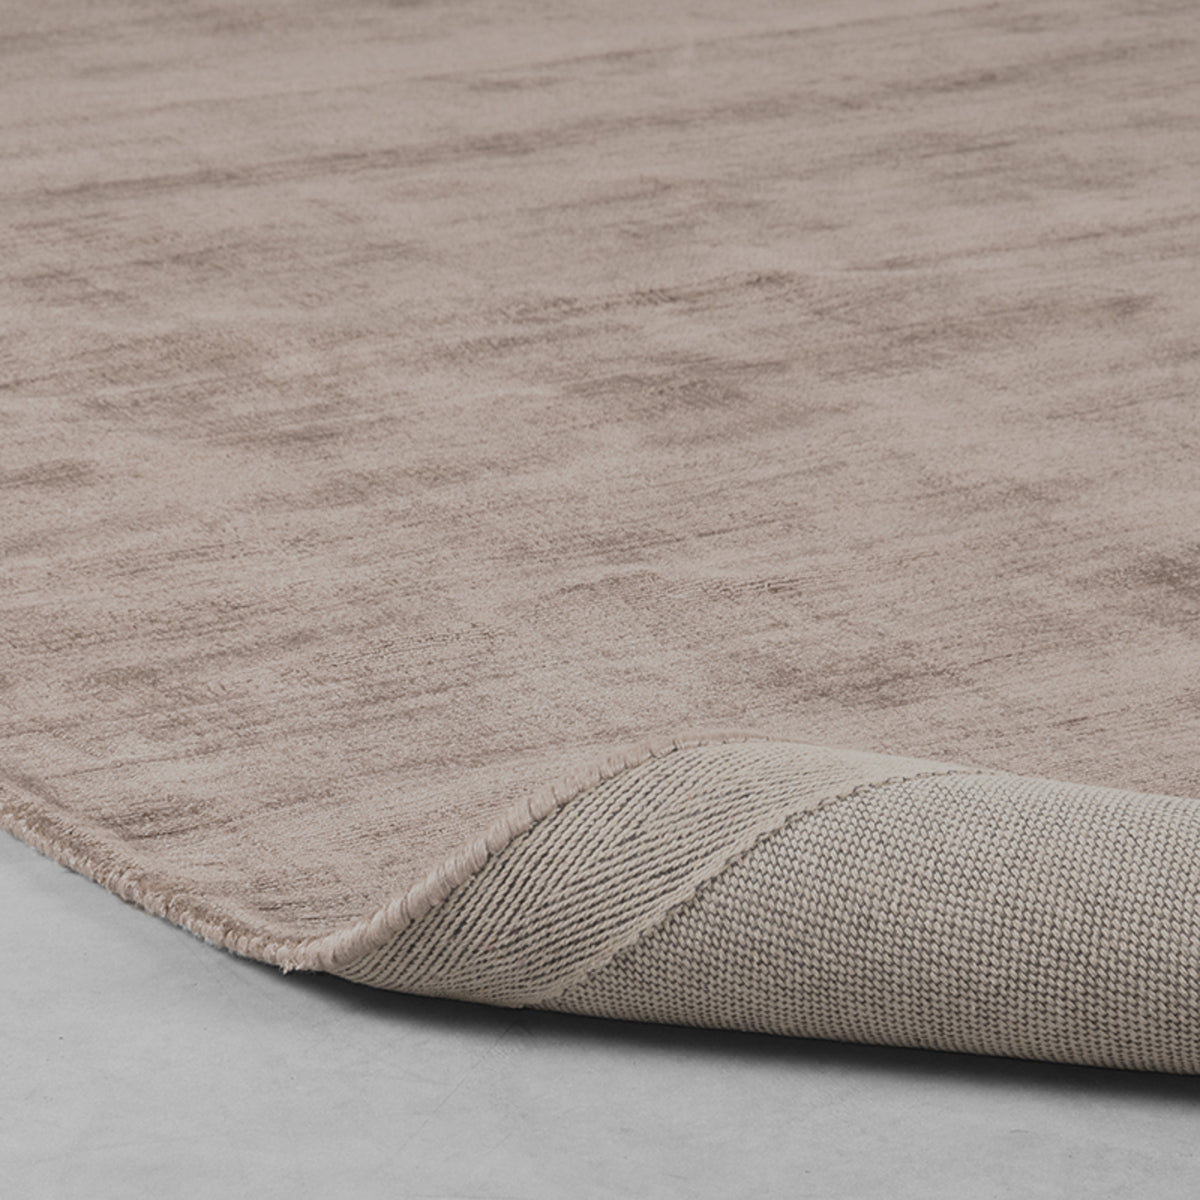 LABEL51 Rugs Velvy - Taupe - Synthetic - 200x300 cm